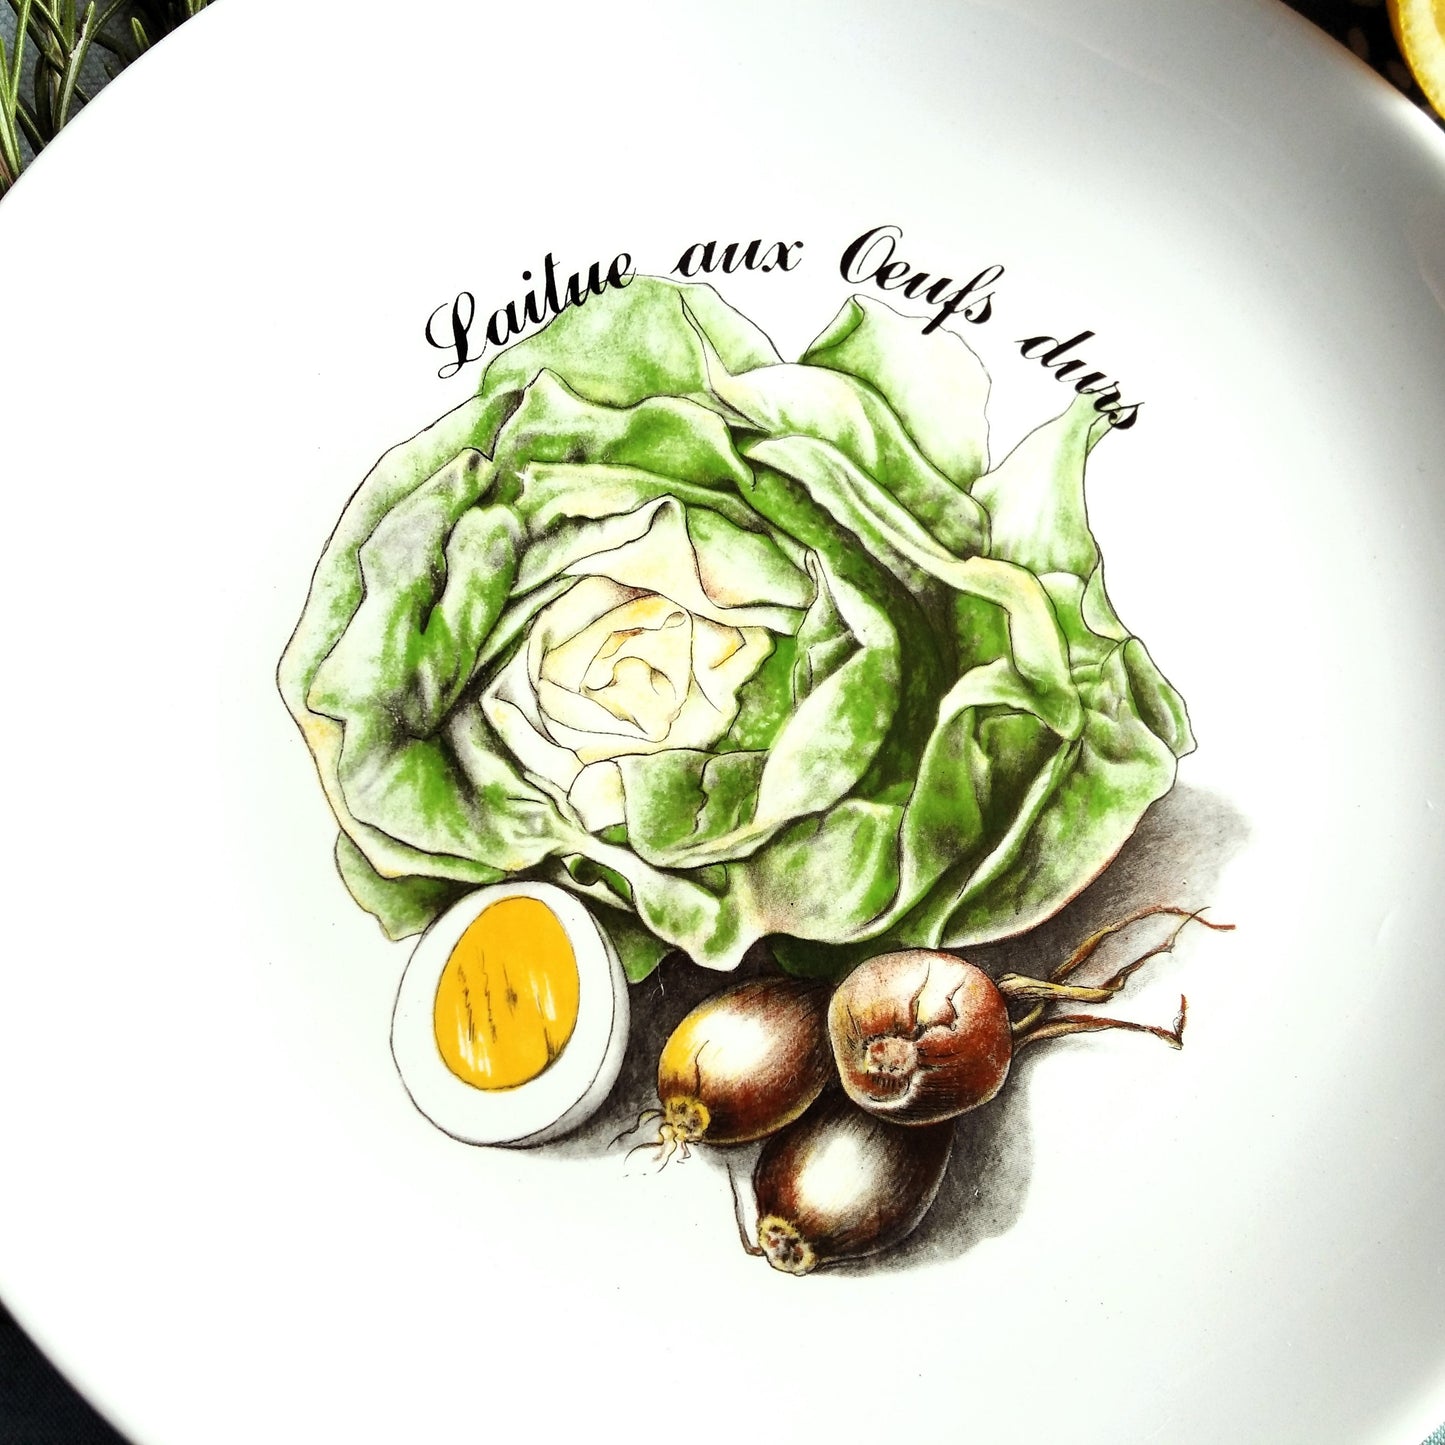 Five Mid Century Modern Salad Recipe Plates from Tiggy & Pip - Just €130! Shop now at Tiggy and Pip